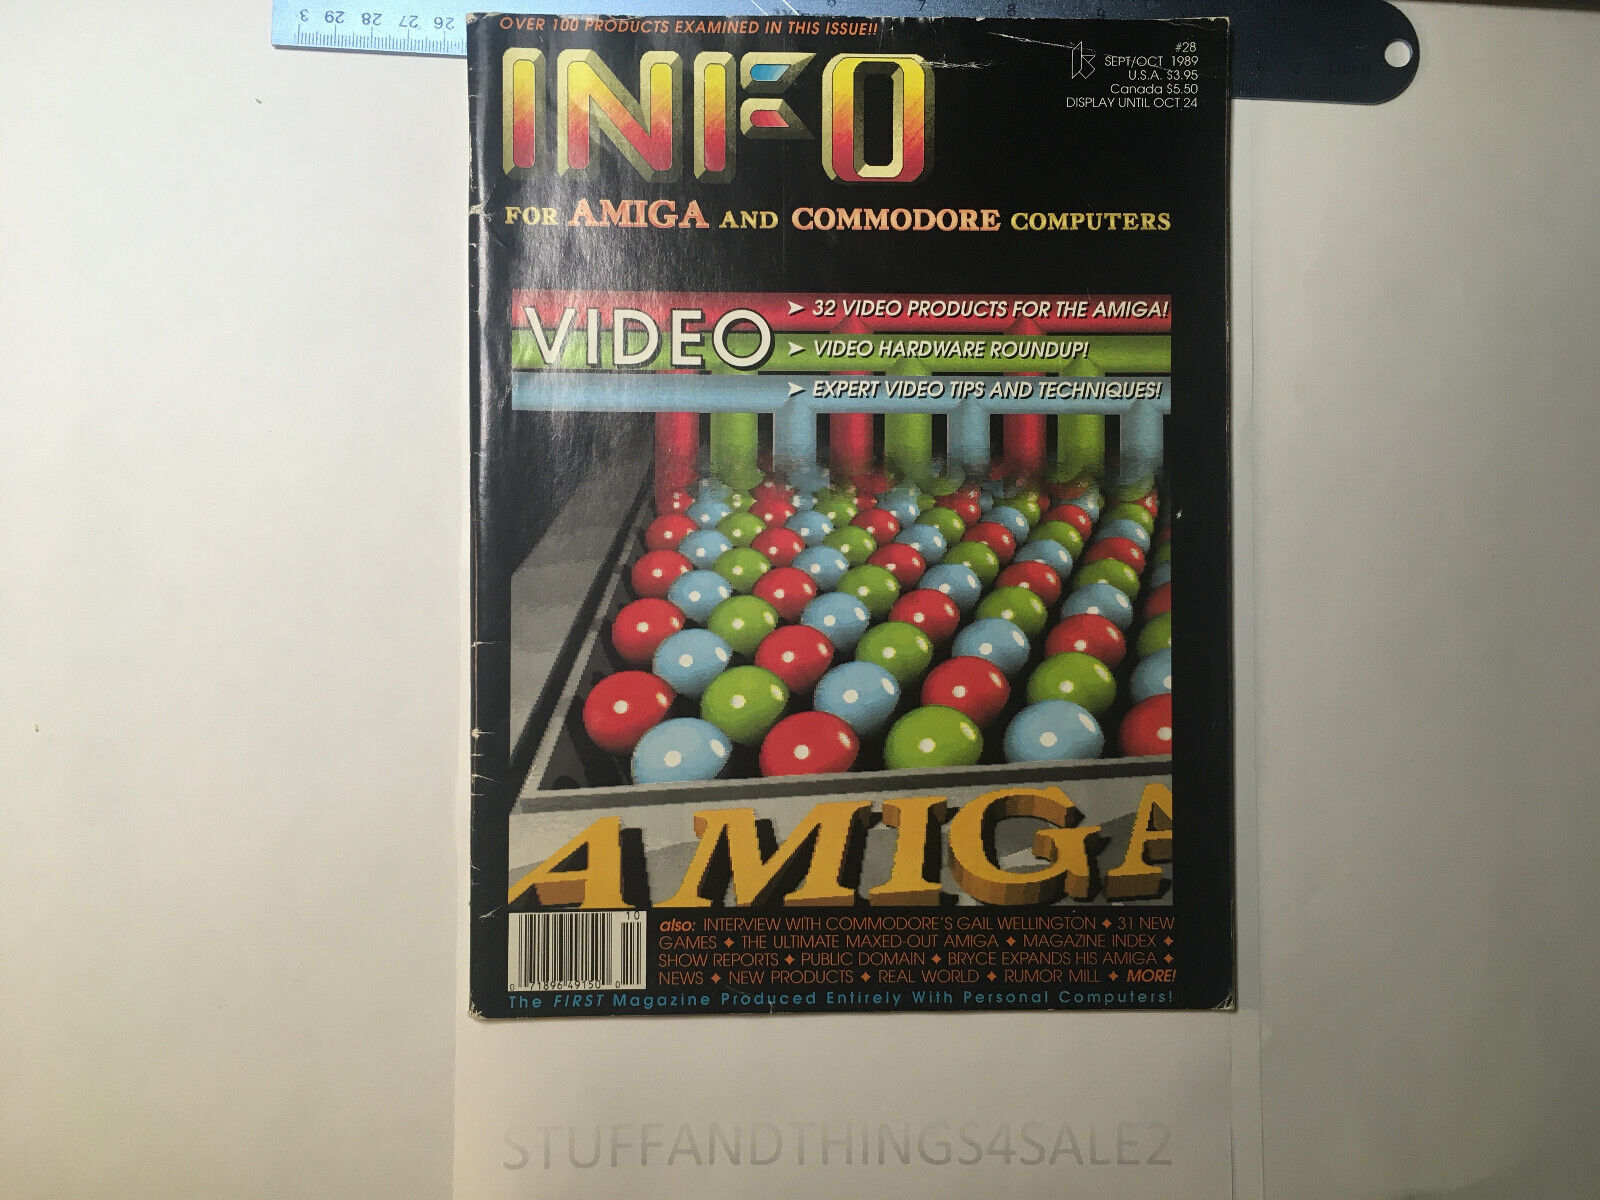 INFO Magazine for Amiga and Commodore Computers Sept/Oct 1989 #28